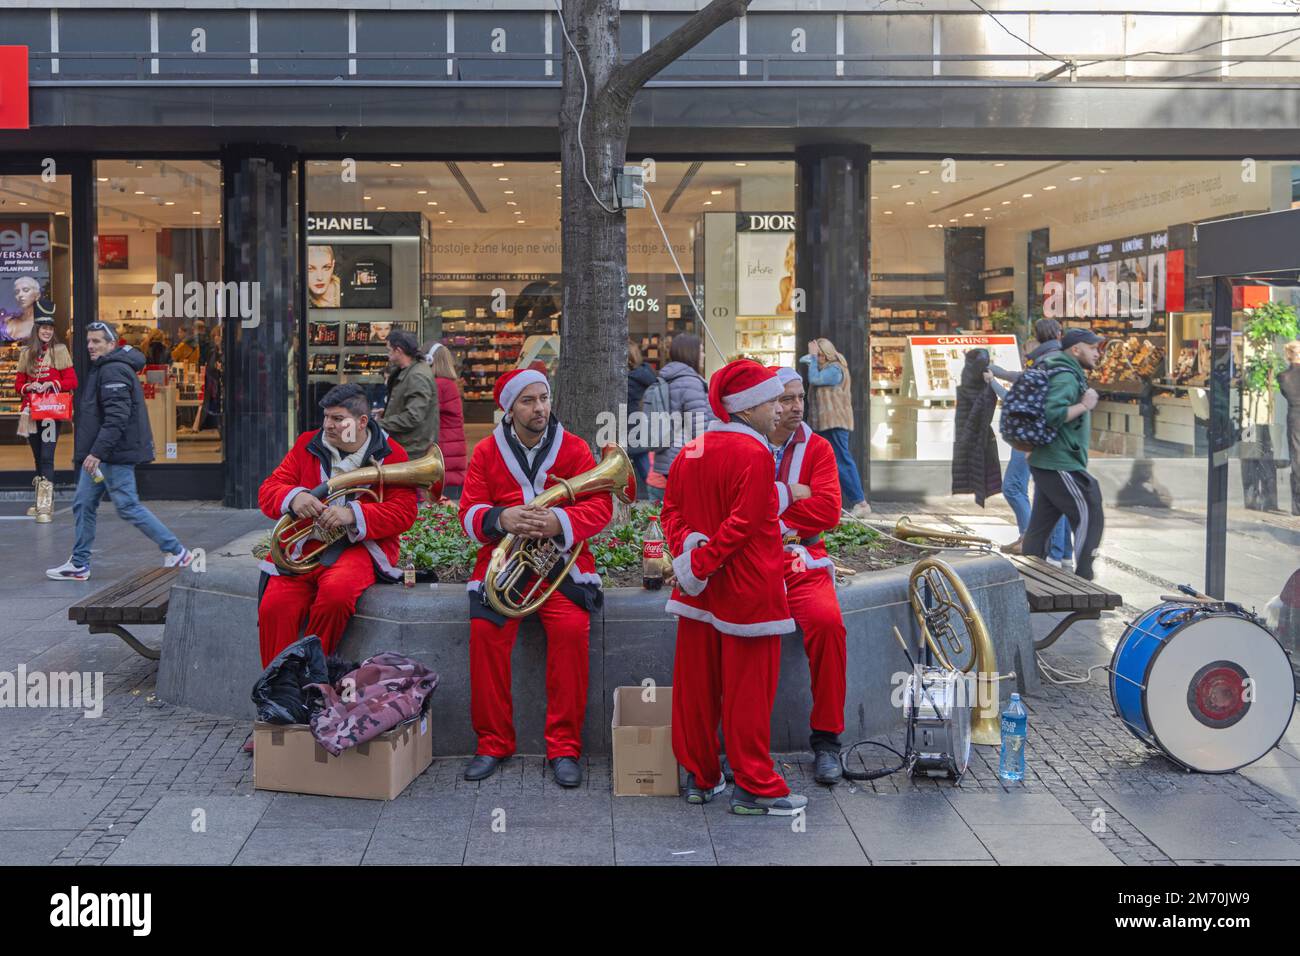 Belgrade, Serbia - December 31, 2022: Street Performers Musicians Dressed as Santa Claus During Christmas Festivity in Capital City Centre. Stock Photo